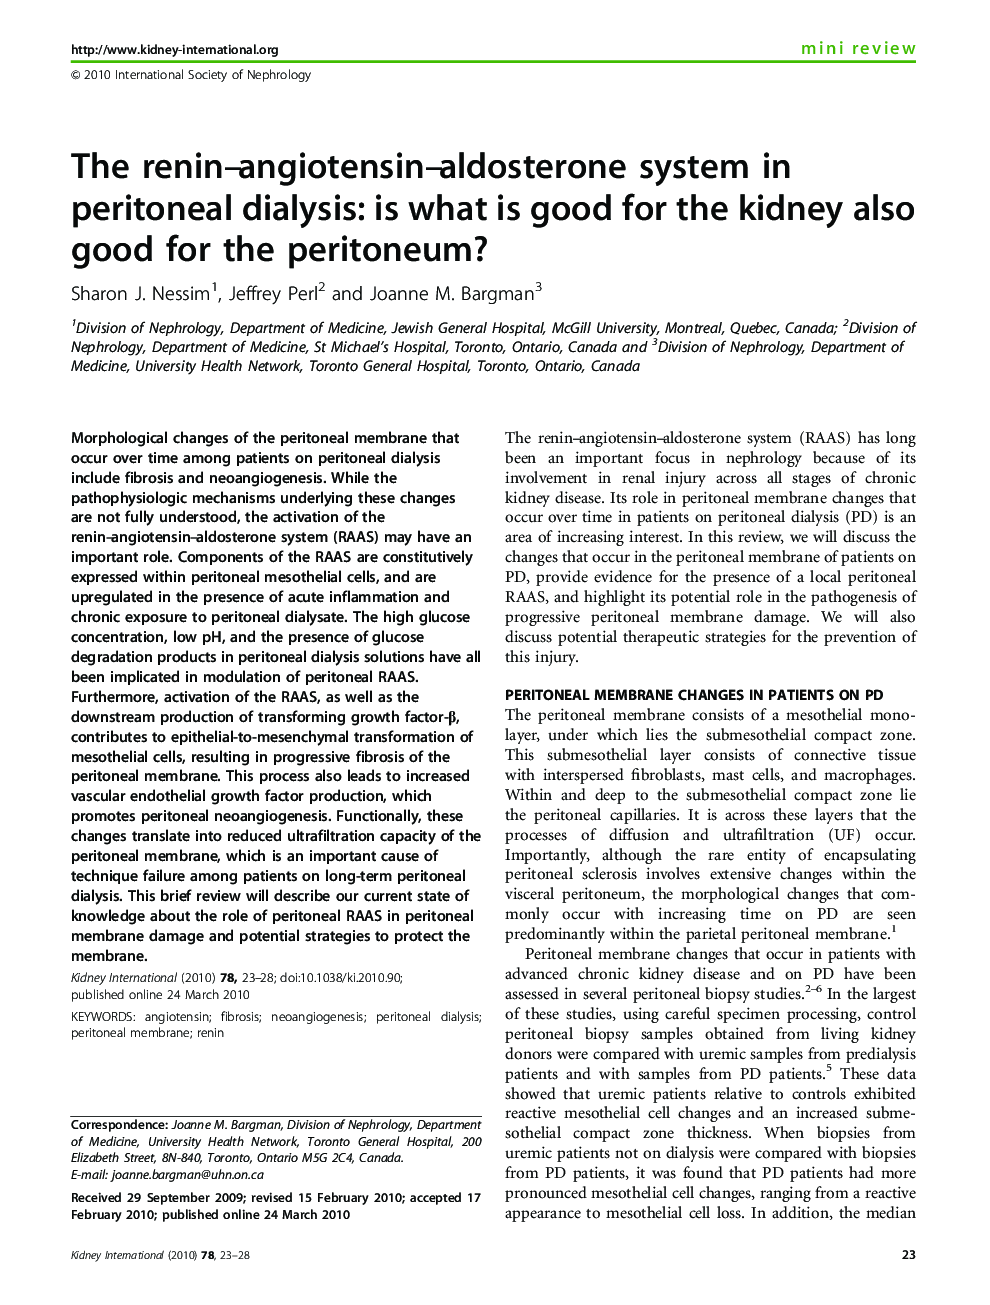 The renin–angiotensin–aldosterone system in peritoneal dialysis: is what is good for the kidney also good for the peritoneum? 